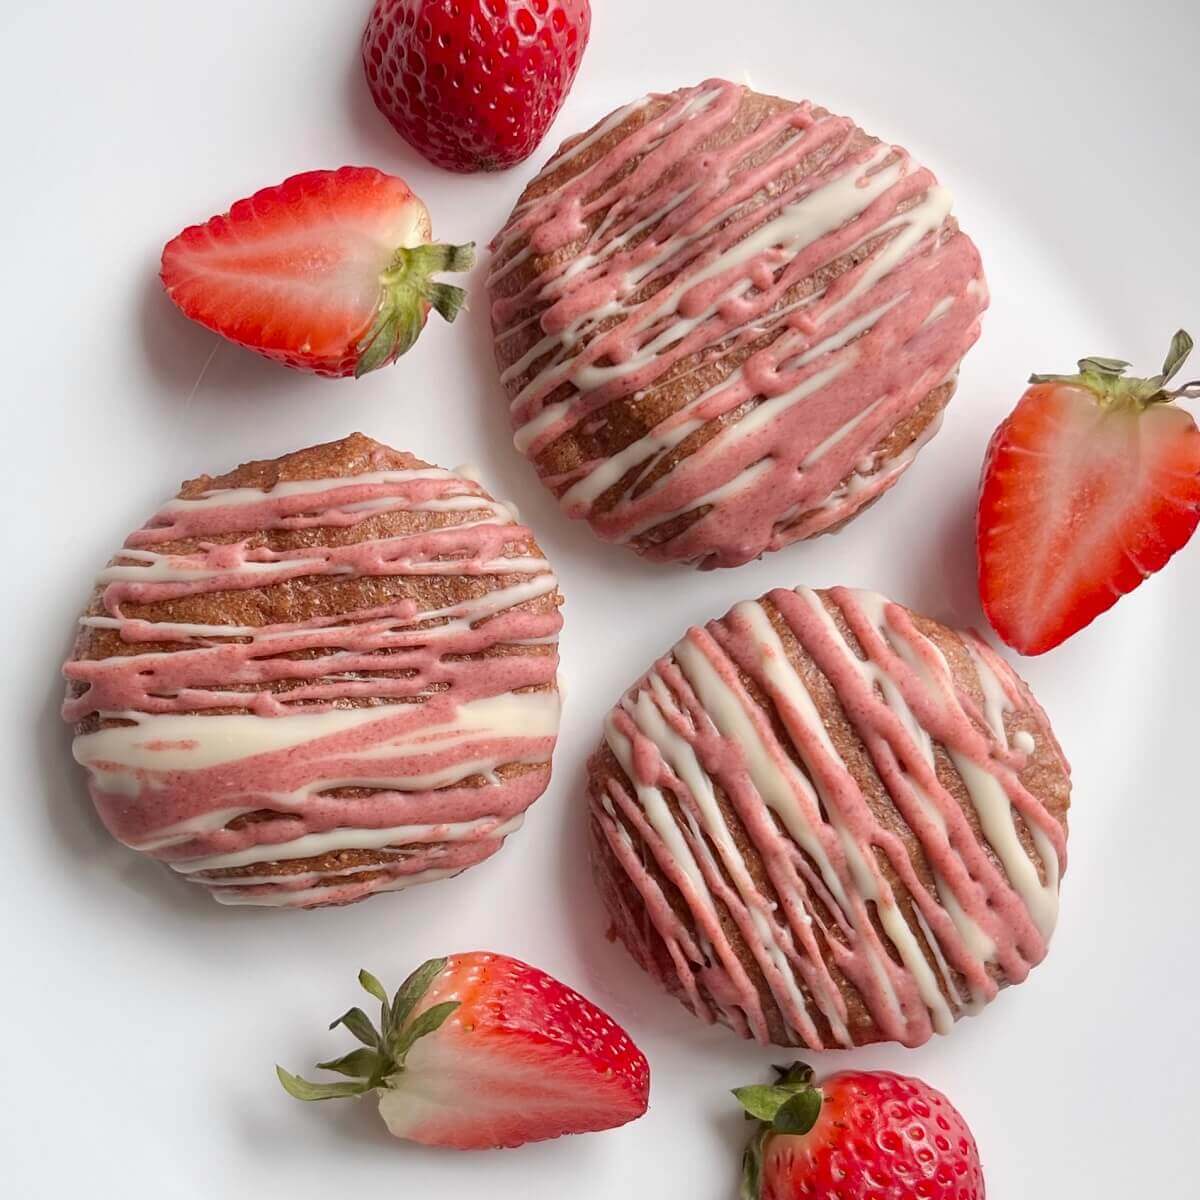 Vegan cookies surrounded by fresh strawberries on a white plate.